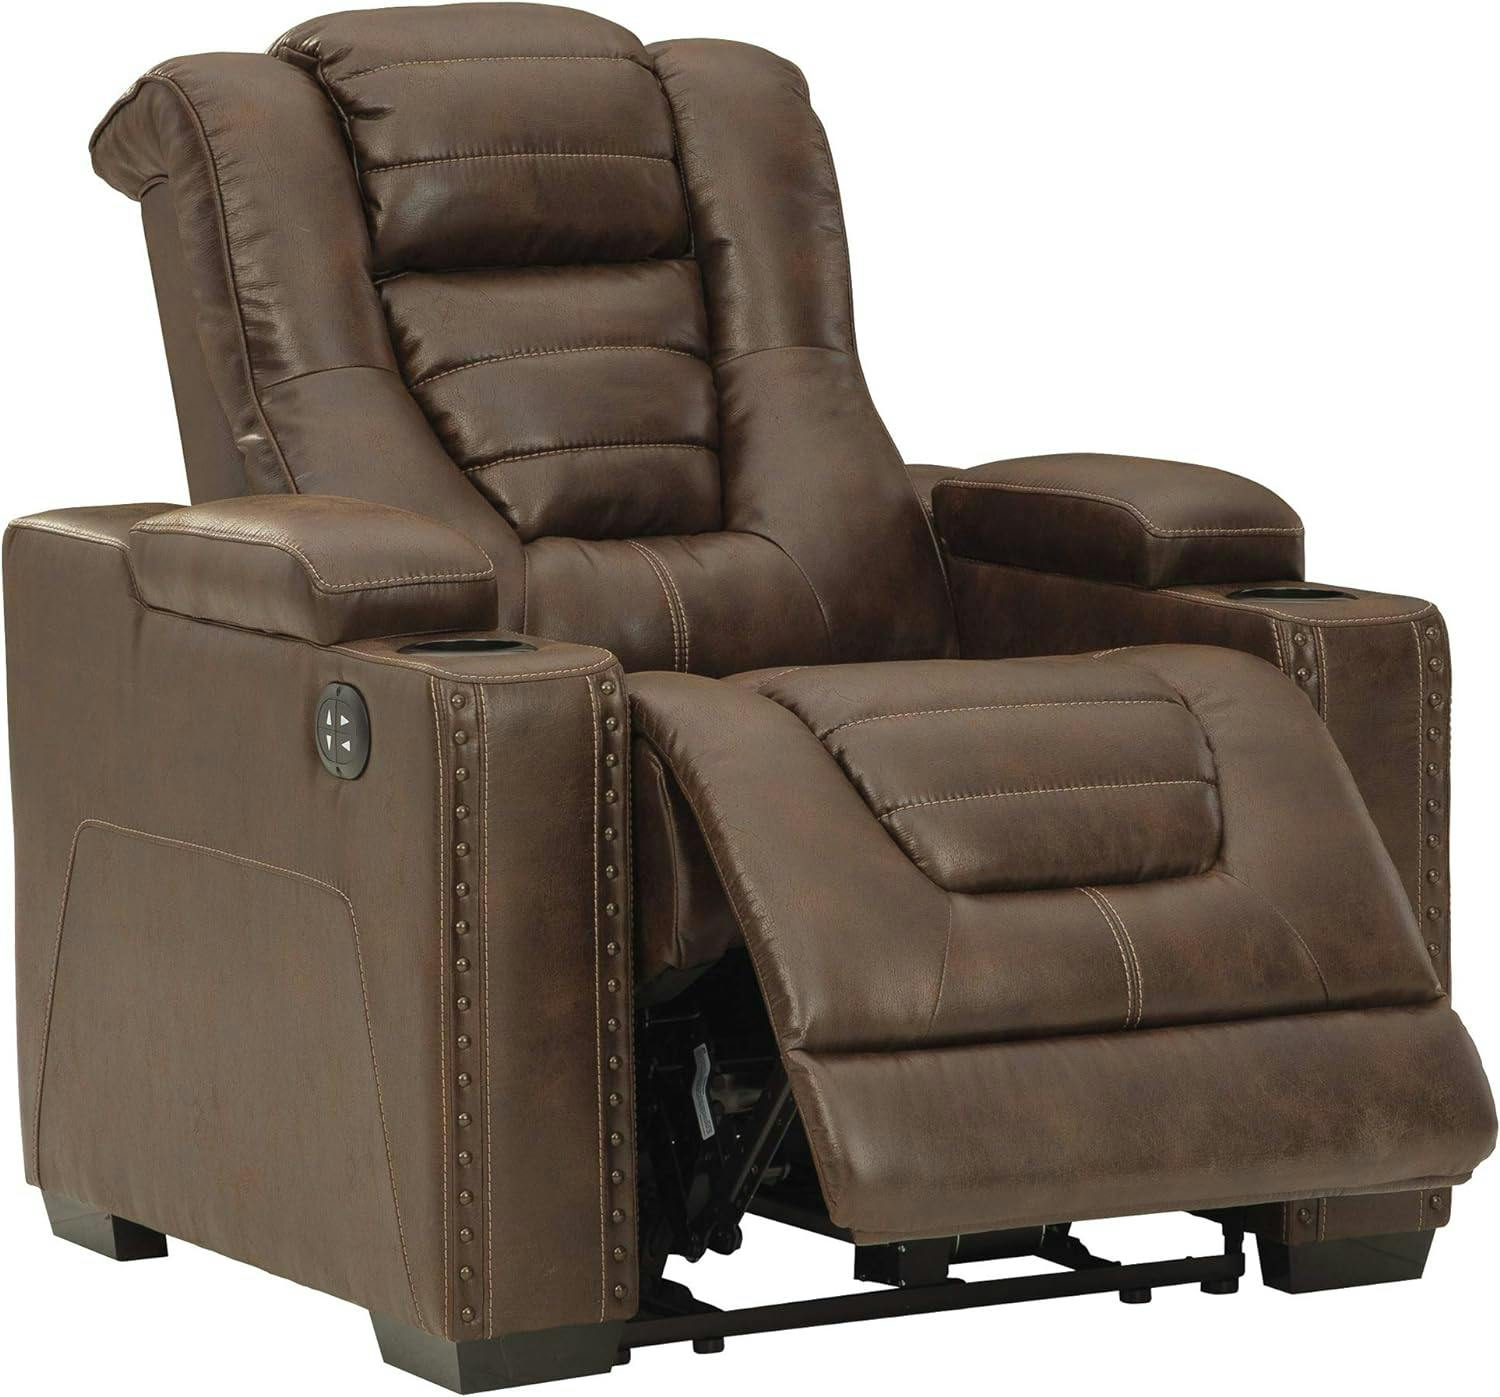 Transitional 38" Brown Faux Leather Power Recliner with Headrest